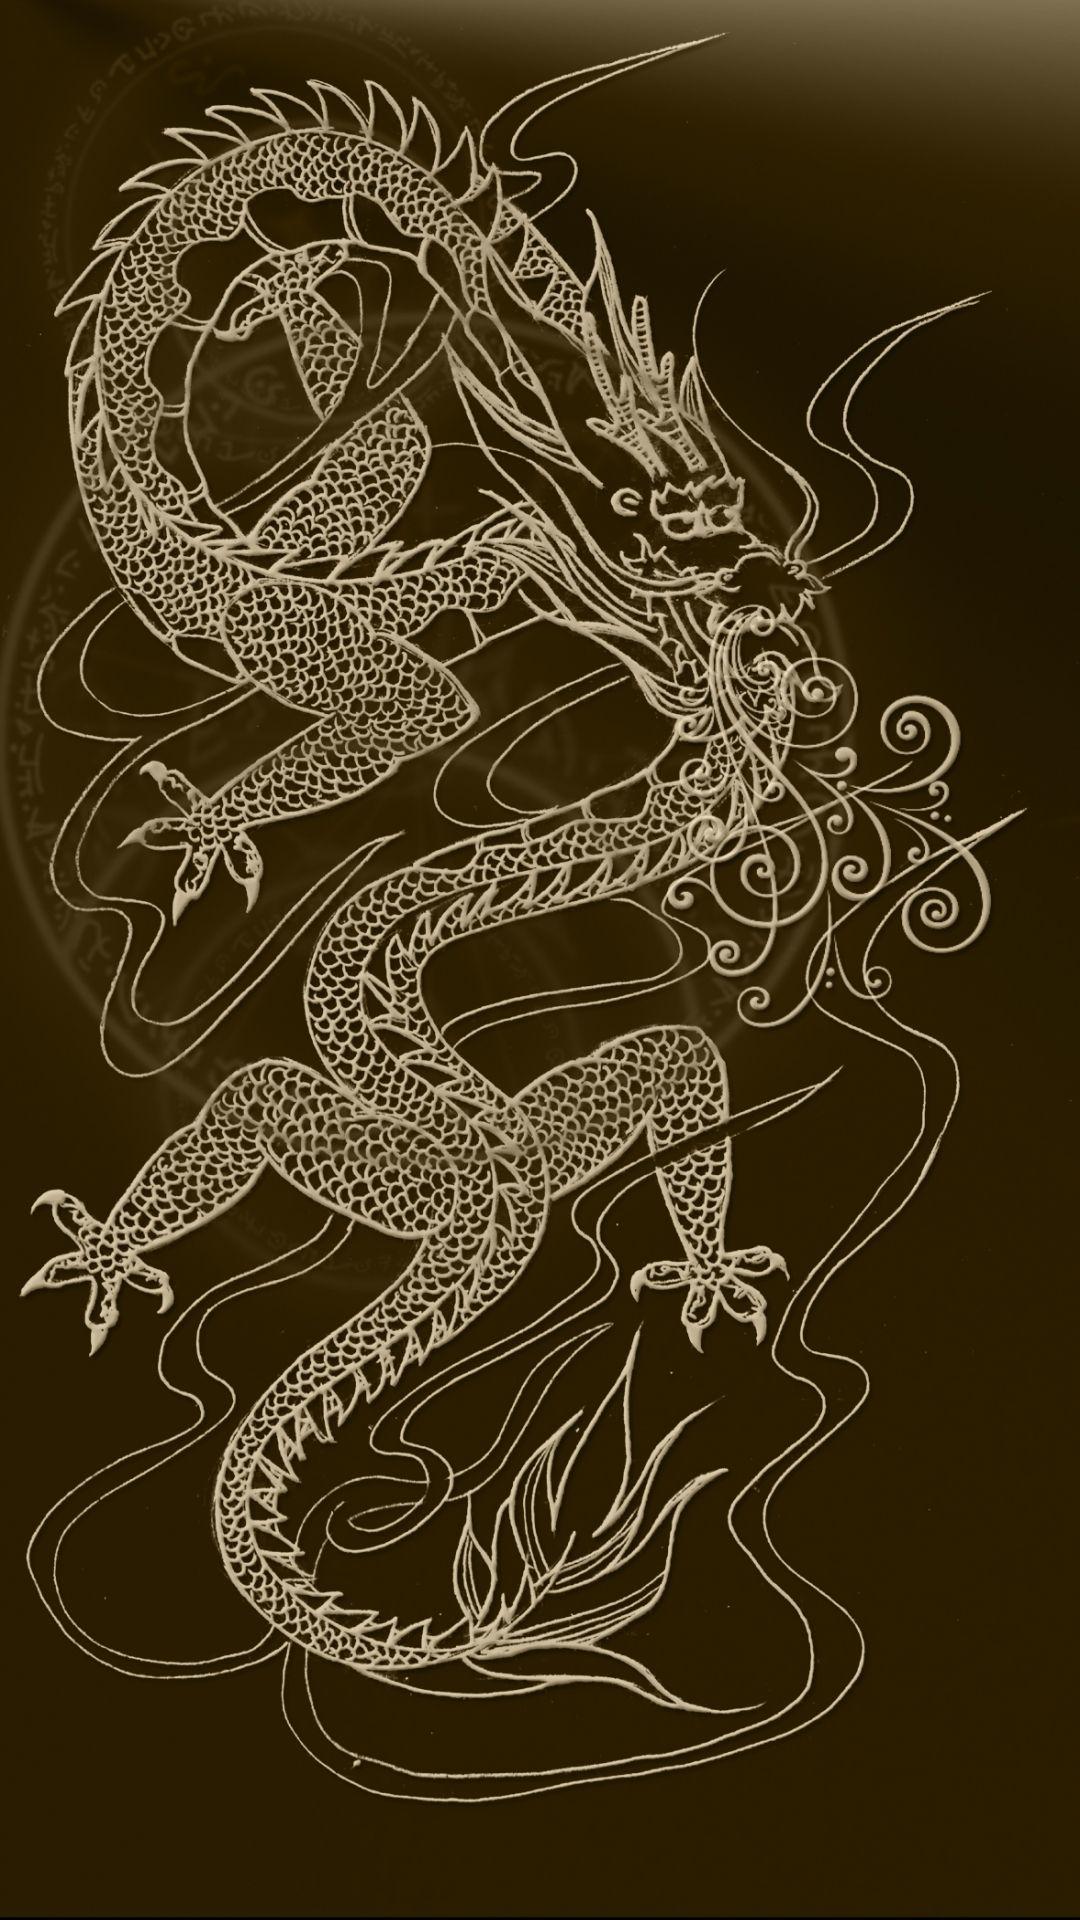 60 Chinese Dragon HD Wallpapers and Backgrounds